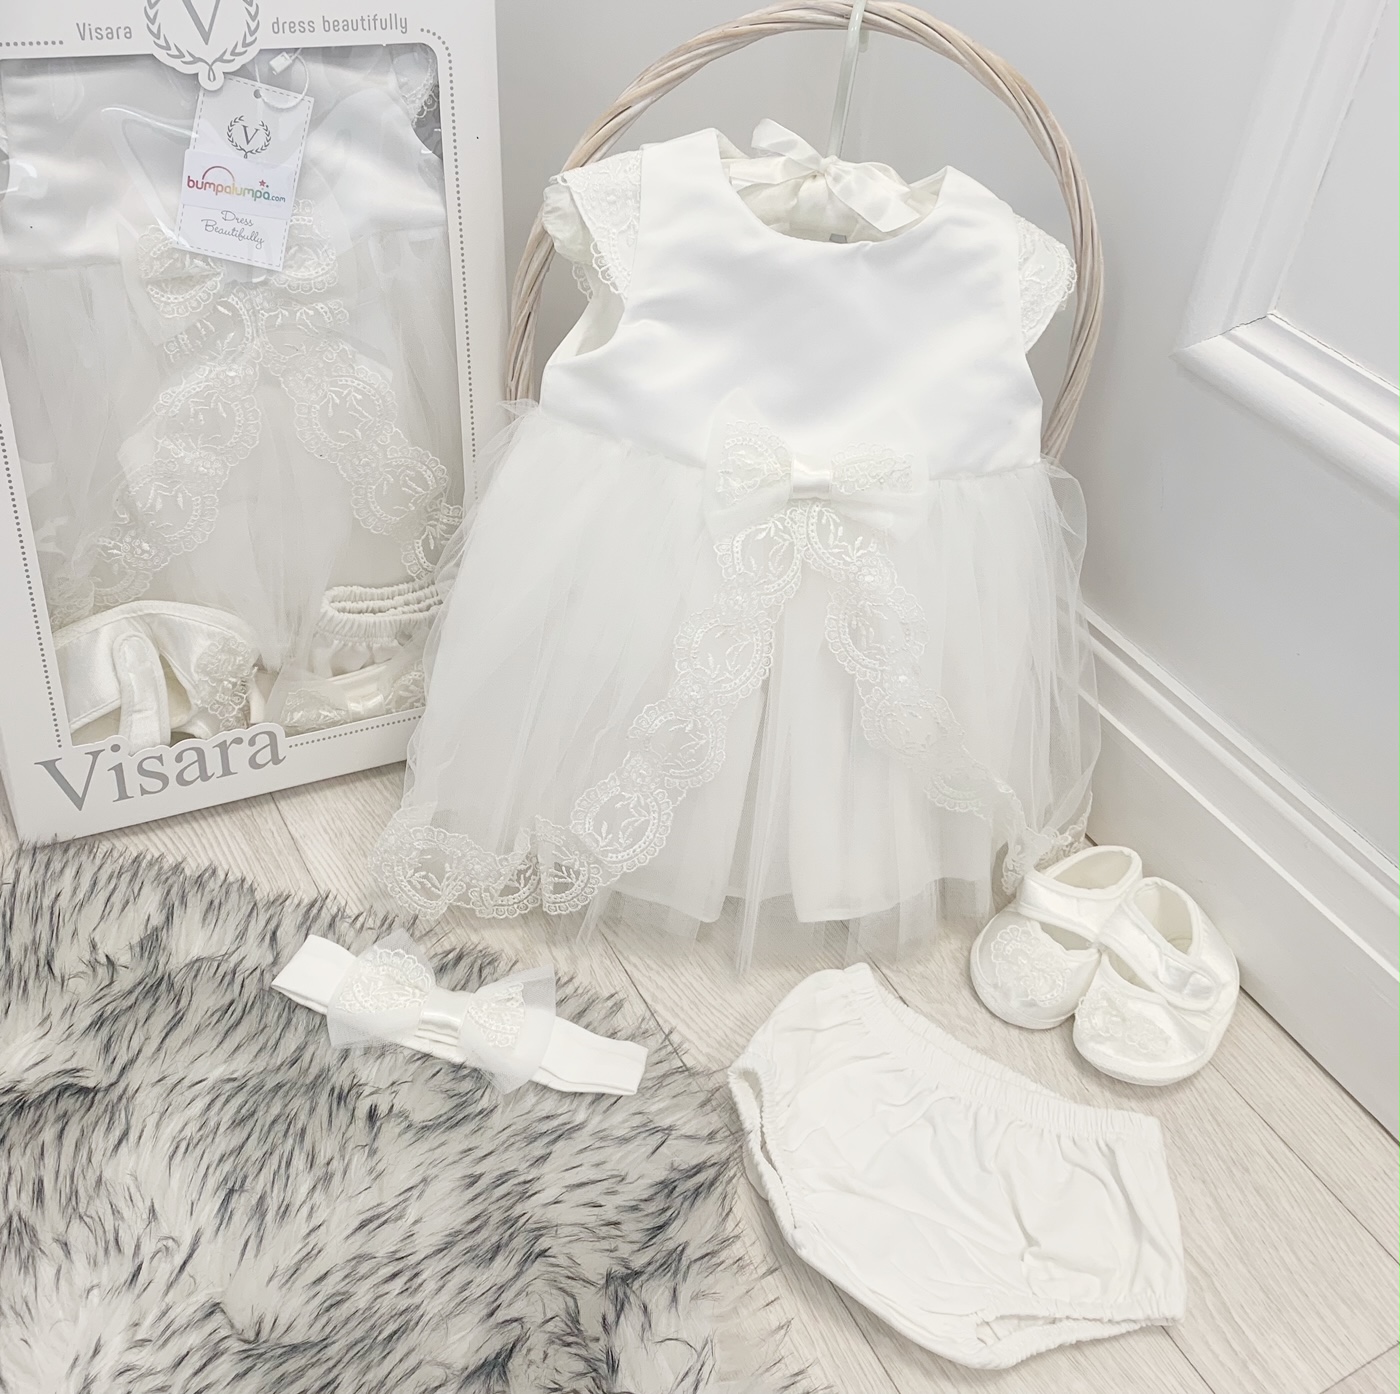 Delicate Elegance Christening Wear - 💗ZARA💗 A heavenly baptism outfit for  a picture-perfect little angel! This natural white silk christening gown  features a breathtaking overlay of soft white lace, which has been